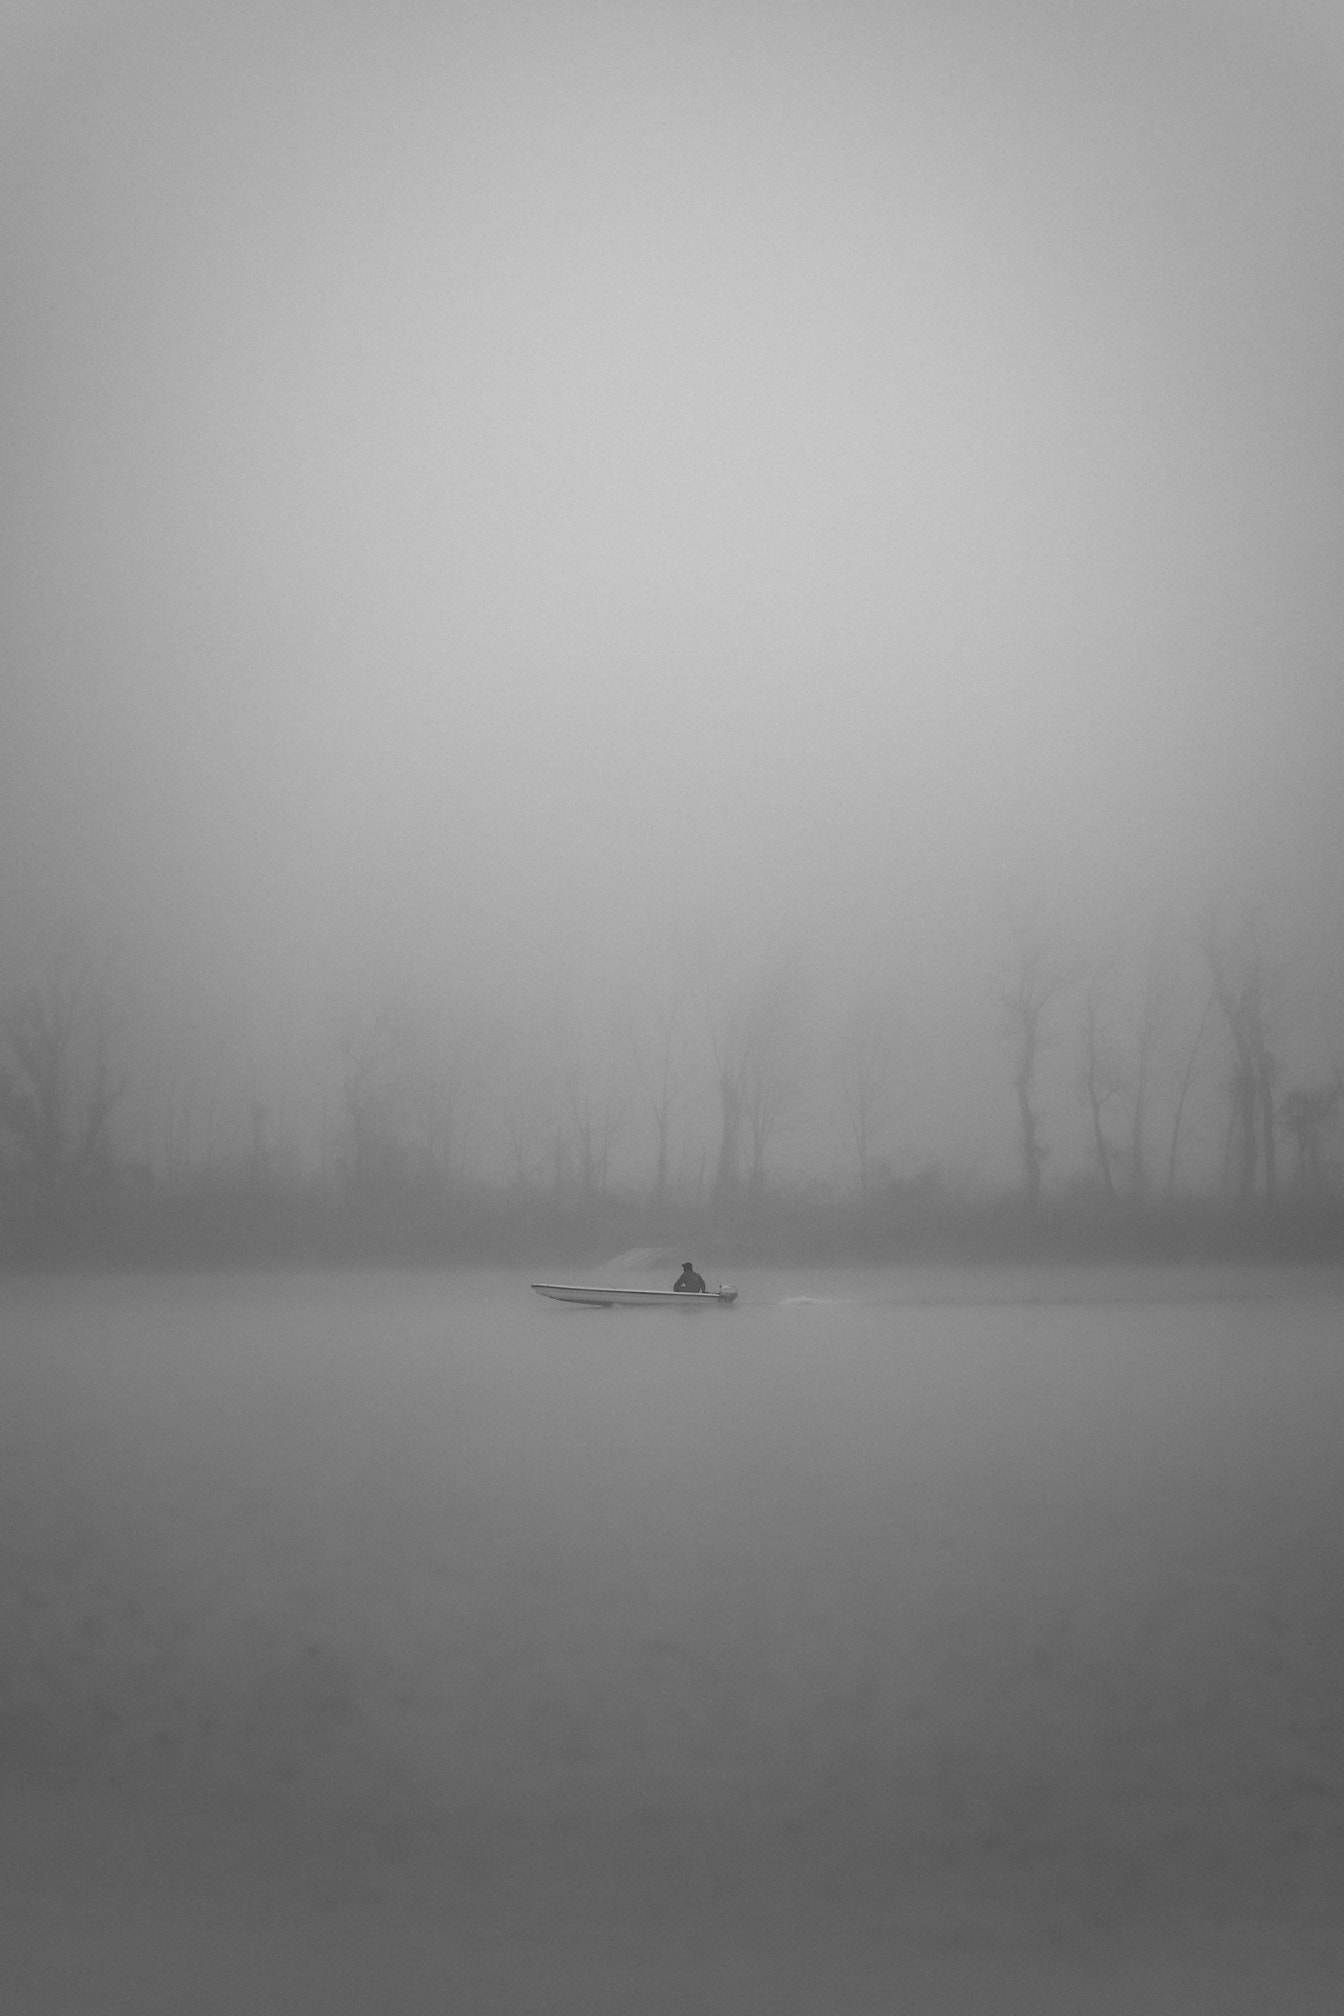 Small fishing boat on foggy Danube river in distance